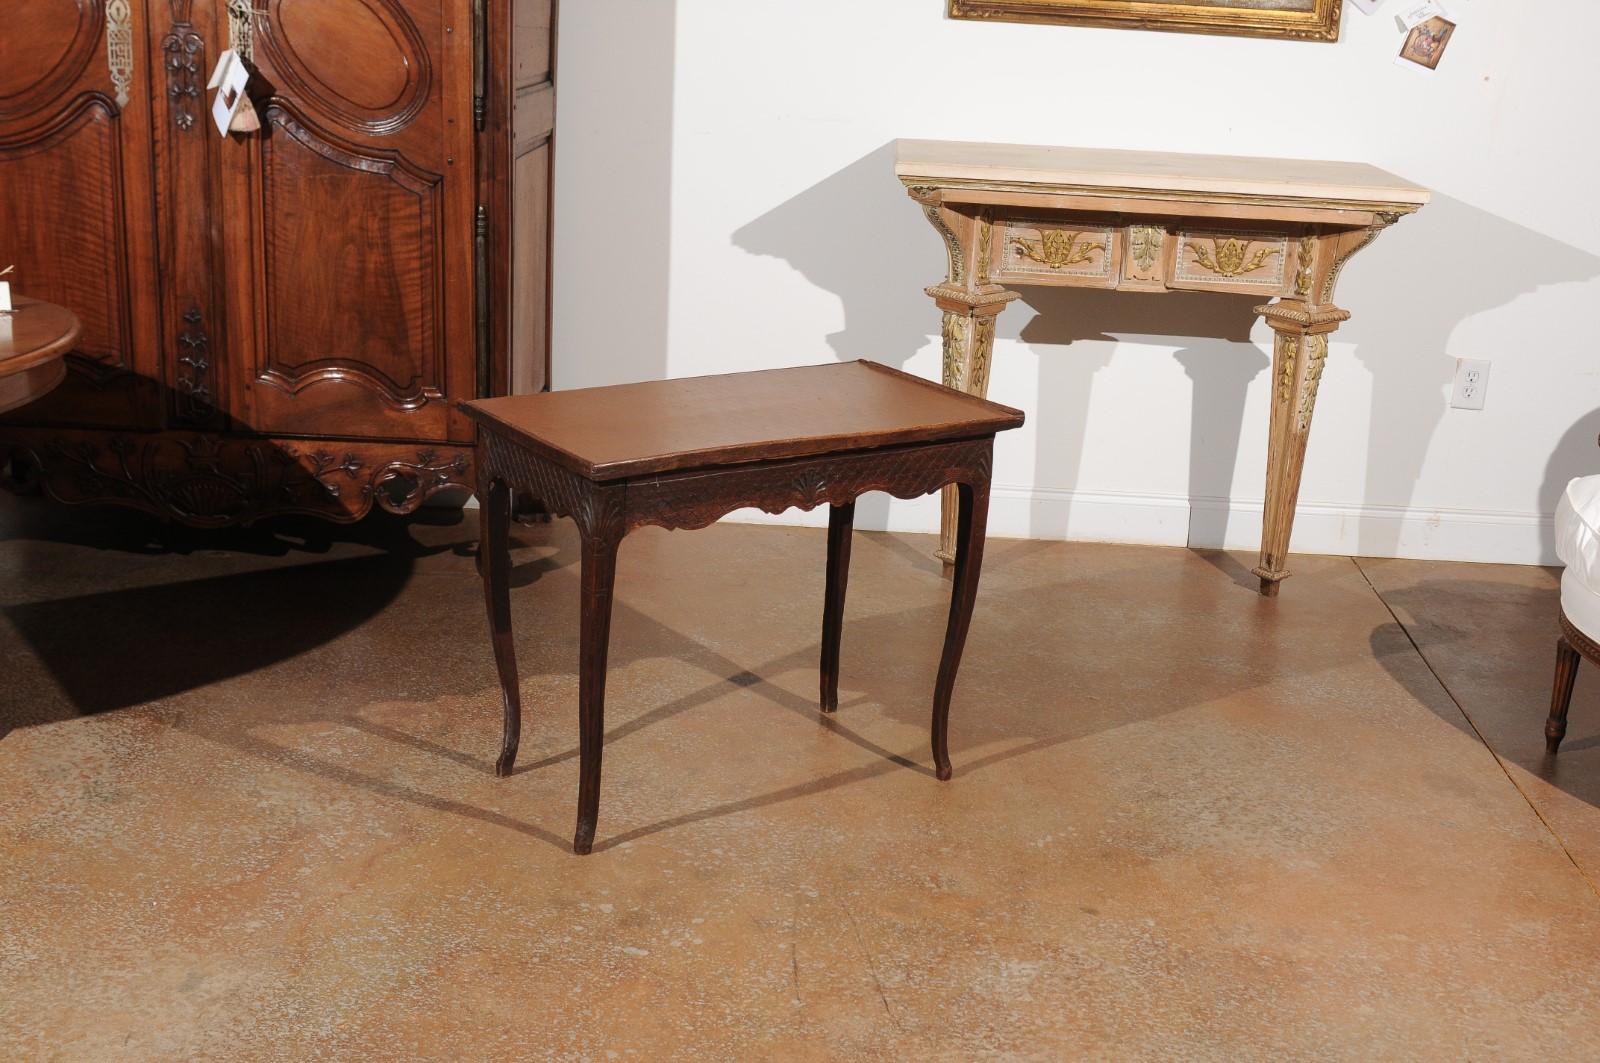 A French restauration period oak side table from the early 19th century, with tray top, two drawers and diamond motifs. Born in France during the restauration period that saw the brief return of monarchy, this charming side table features a